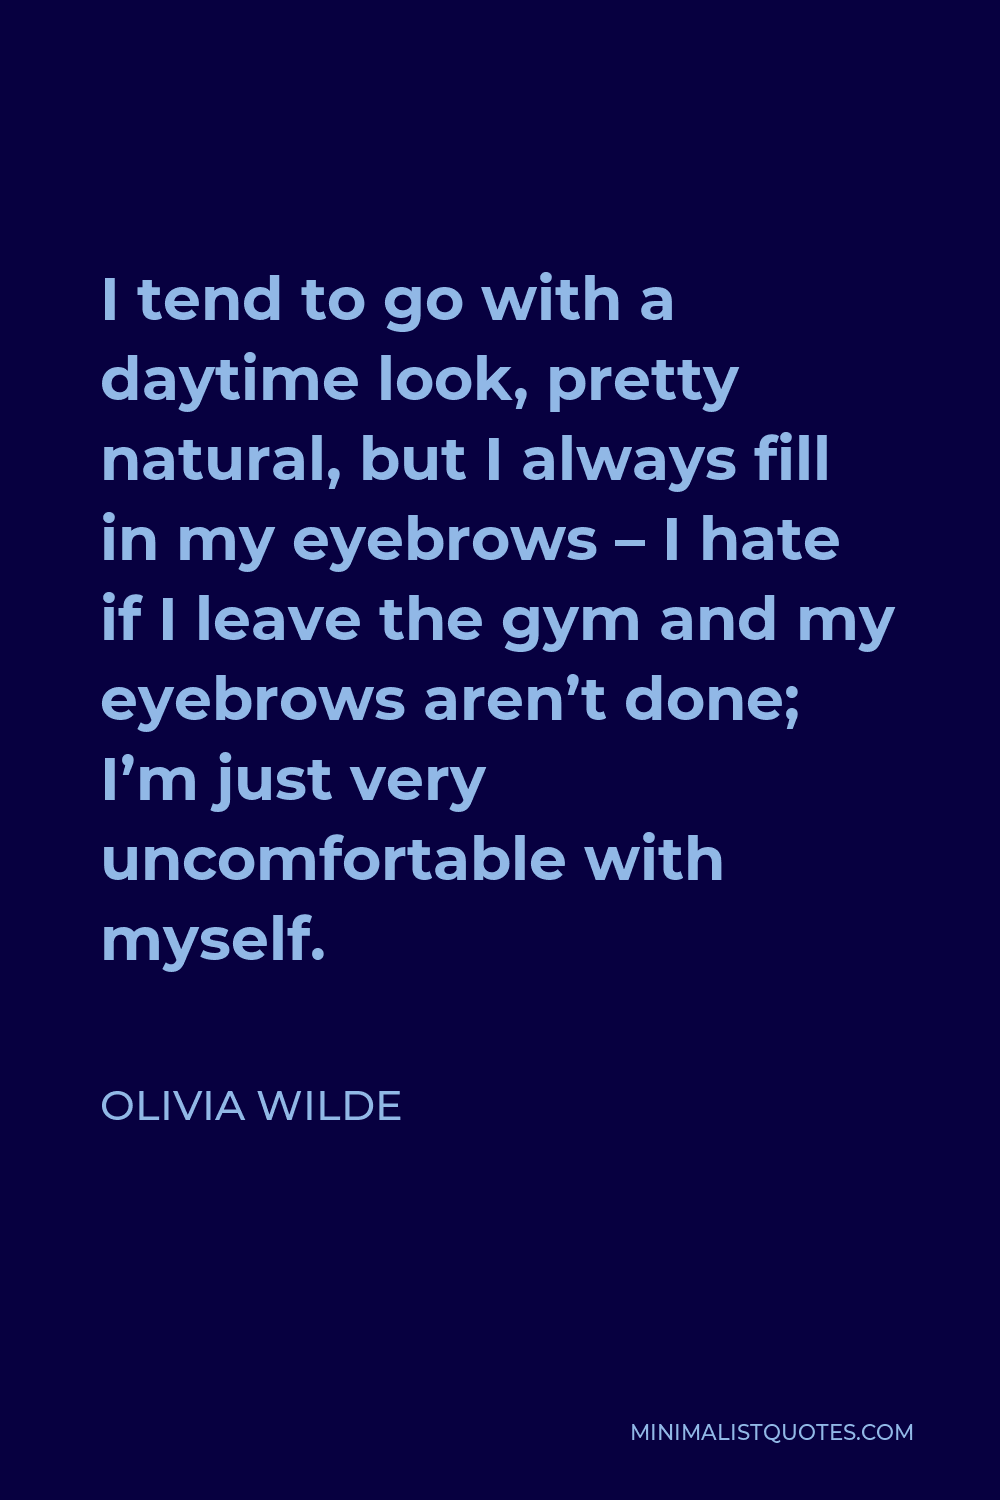 Olivia Wilde Quote - I tend to go with a daytime look, pretty natural, but I always fill in my eyebrows – I hate if I leave the gym and my eyebrows aren’t done; I’m just very uncomfortable with myself.